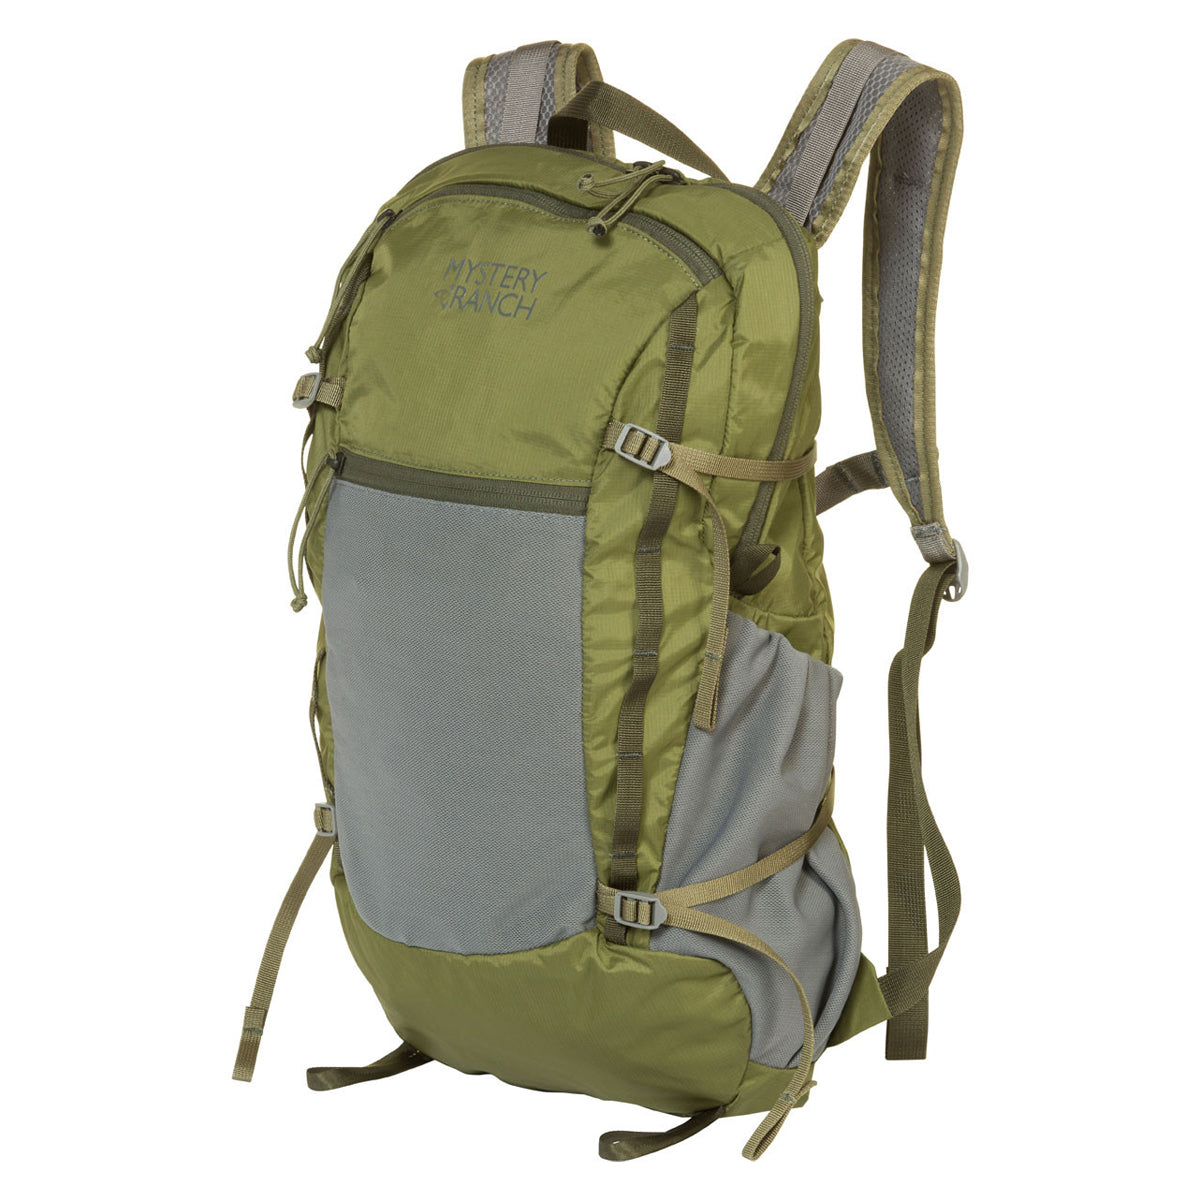 Mystery Ranch In and Out Backpack in Mystery Ranch In and Out Backpack by Mystery Ranch | Gear - goHUNT Shop by GOHUNT | Mystery Ranch - GOHUNT Shop